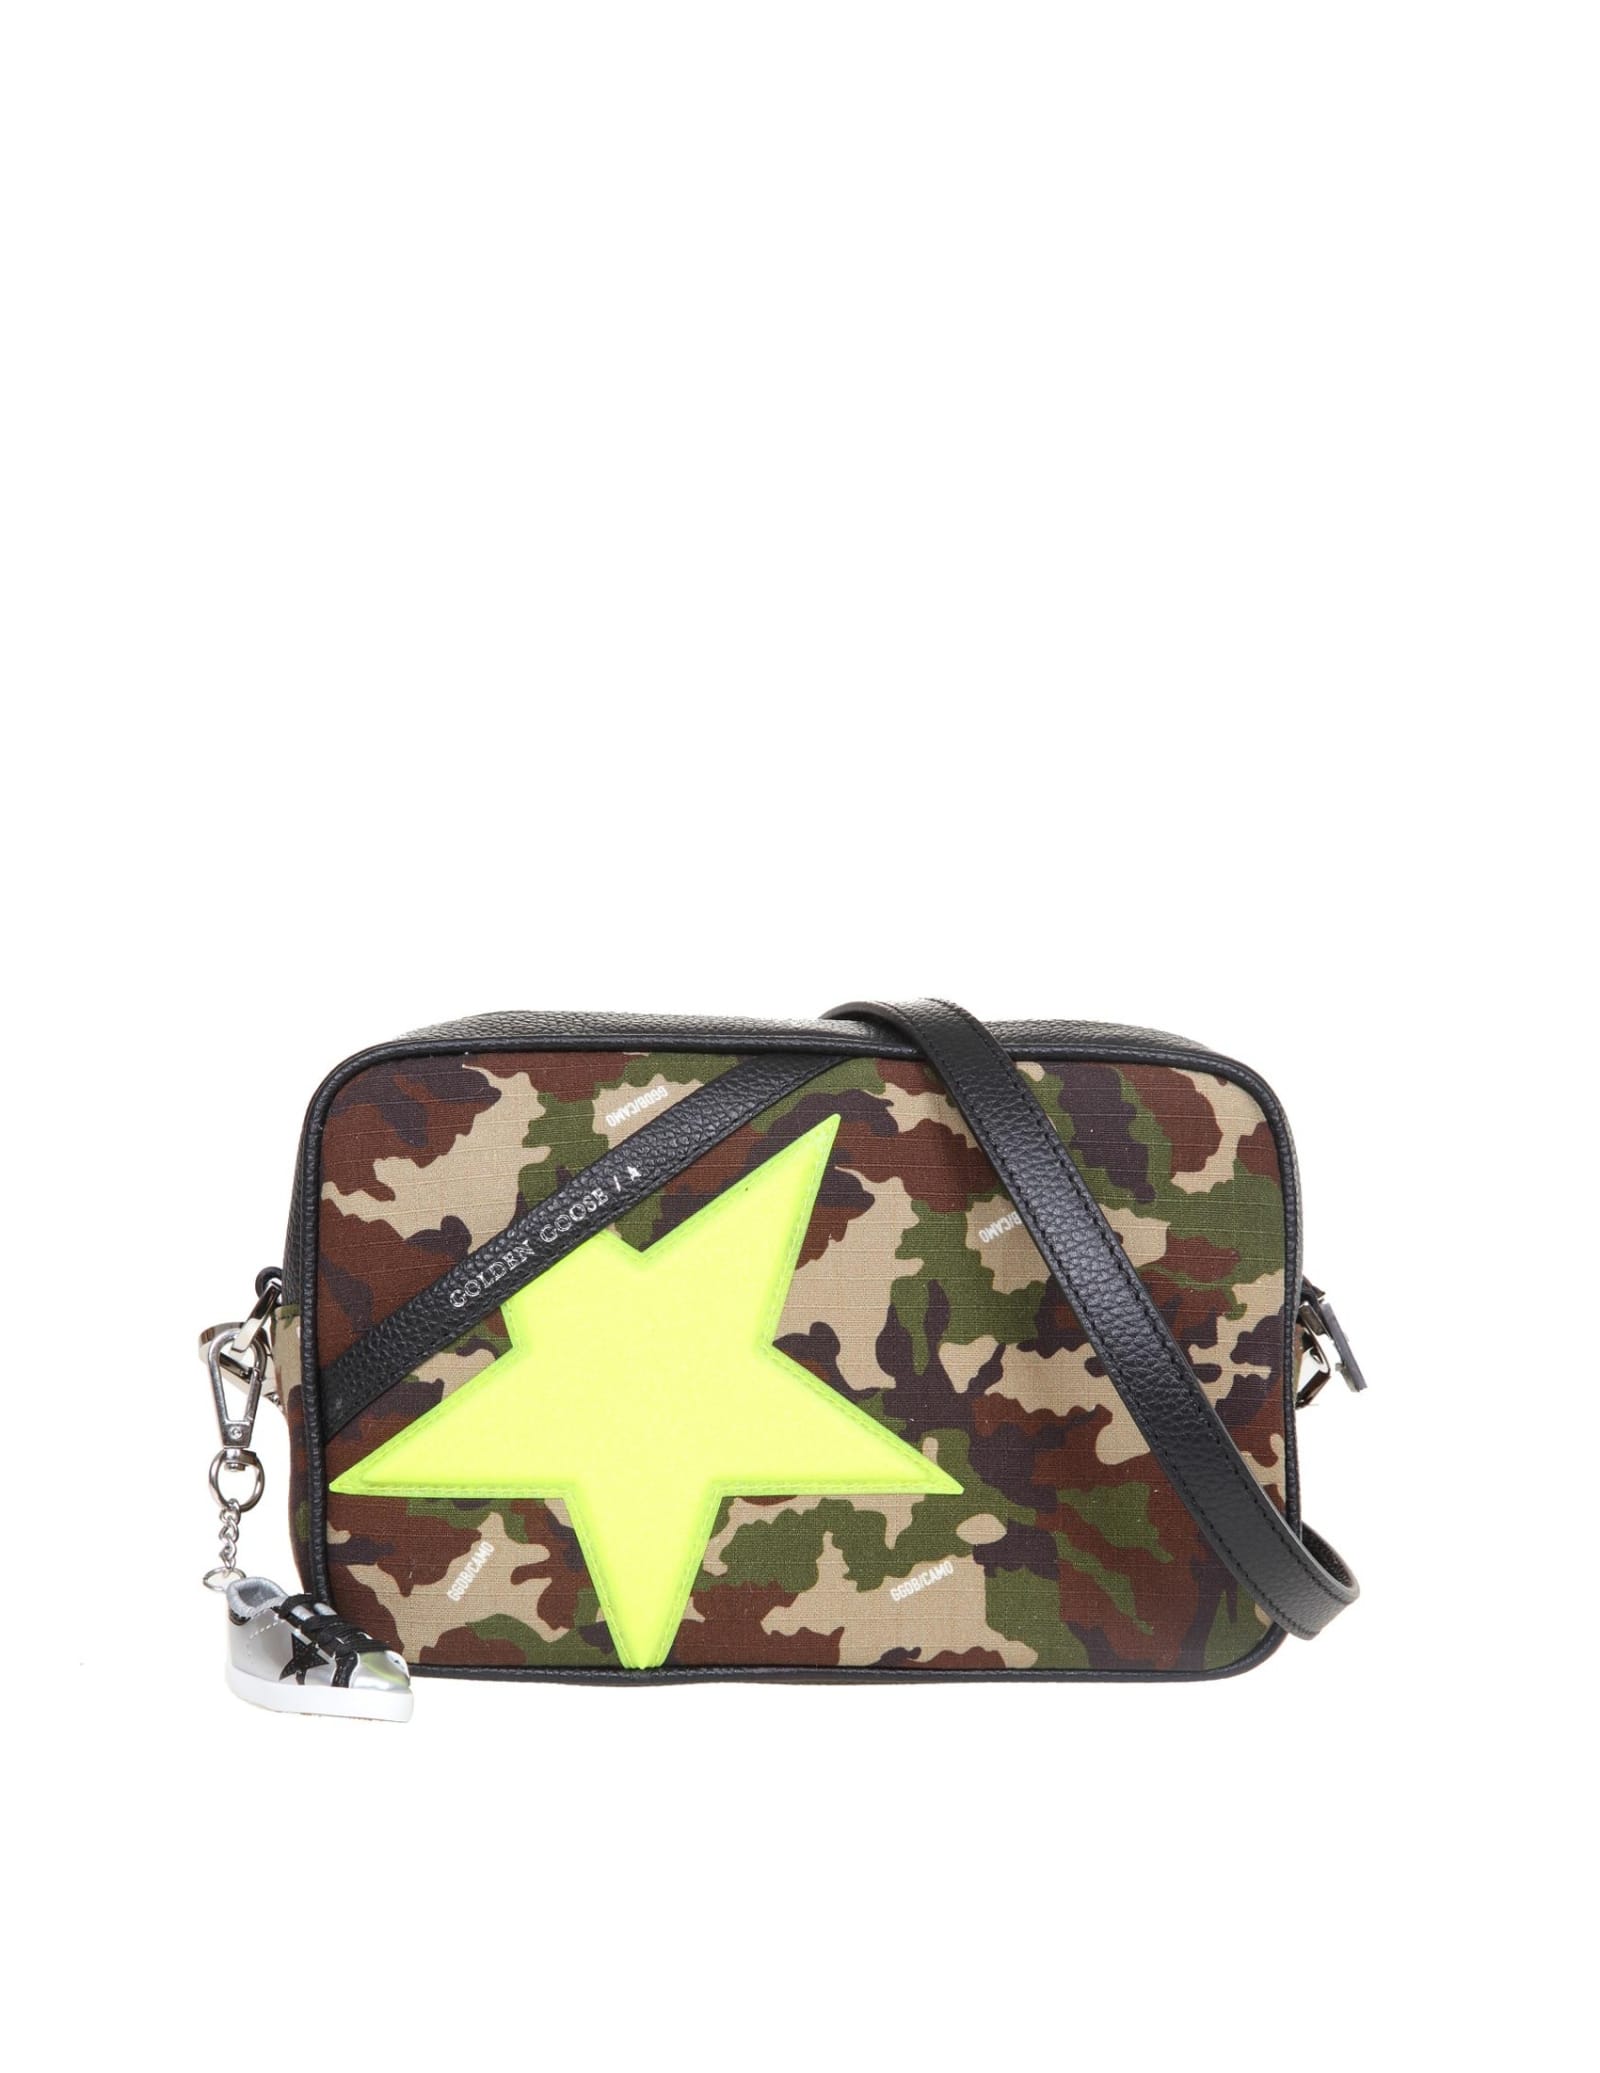 Golden Goose Star Bag In Camouflage Fabric